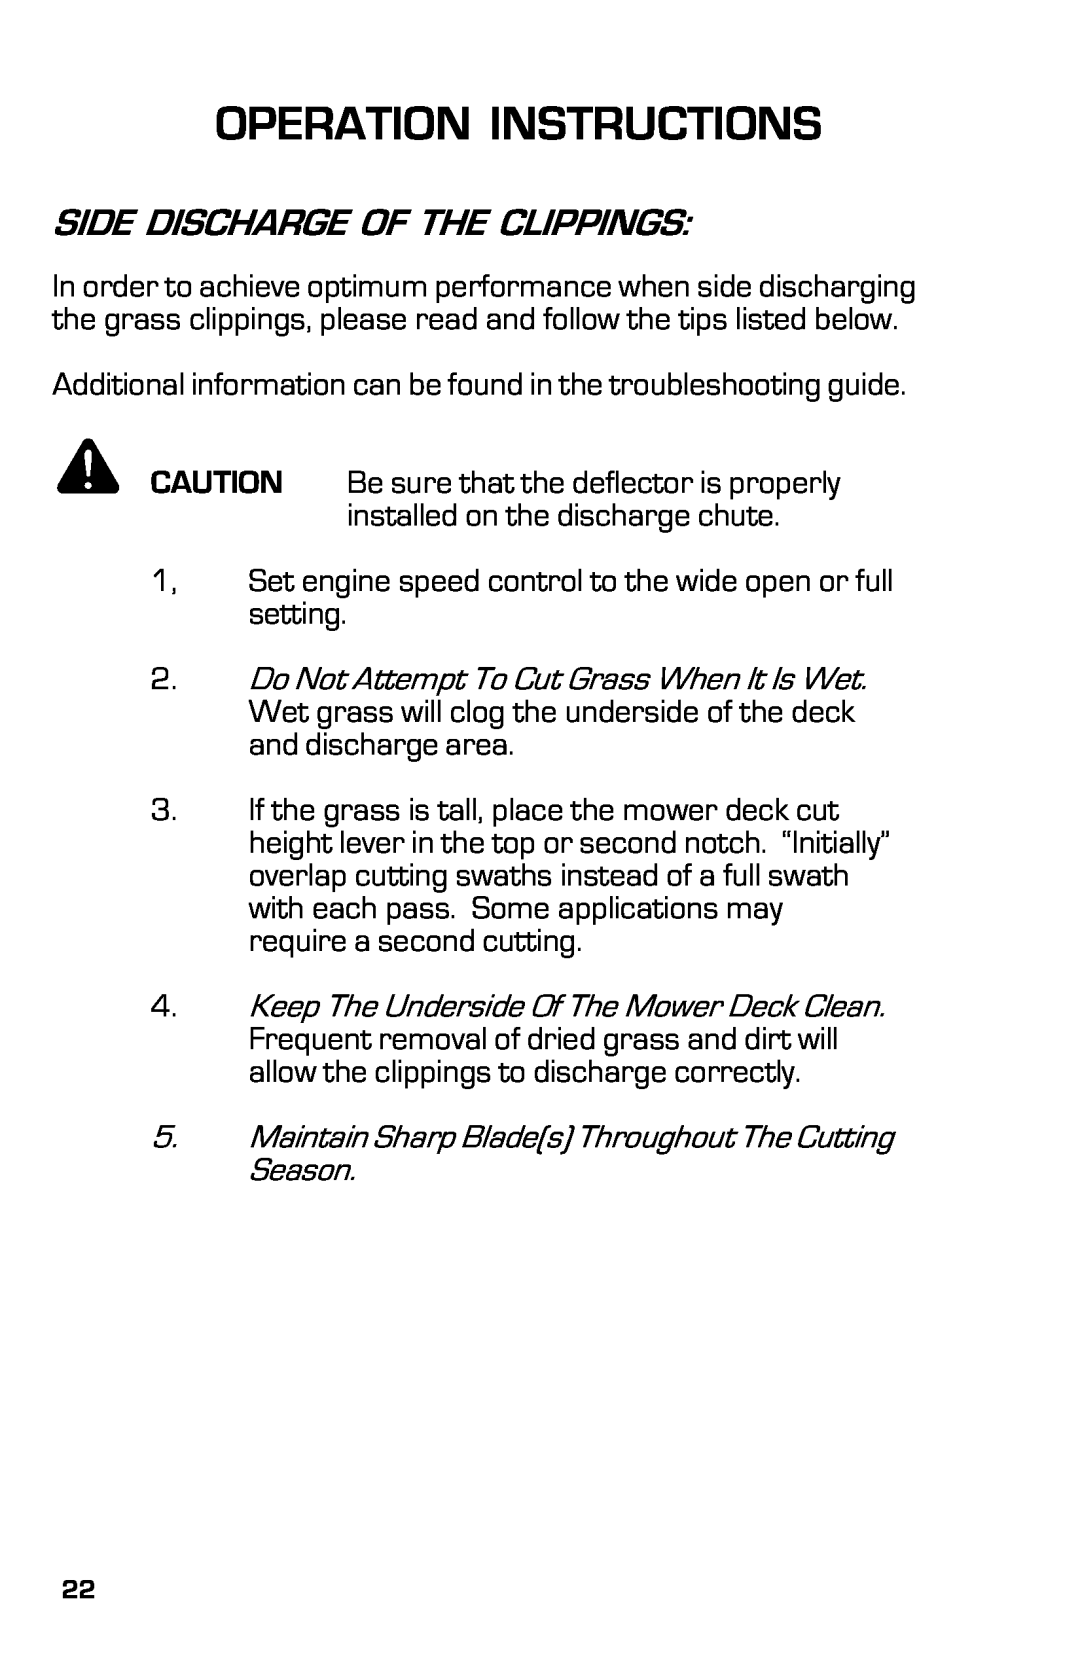 Dixon ZTRCLASSIC manual Side Discharge Of The Clippings, Operation Instructions 